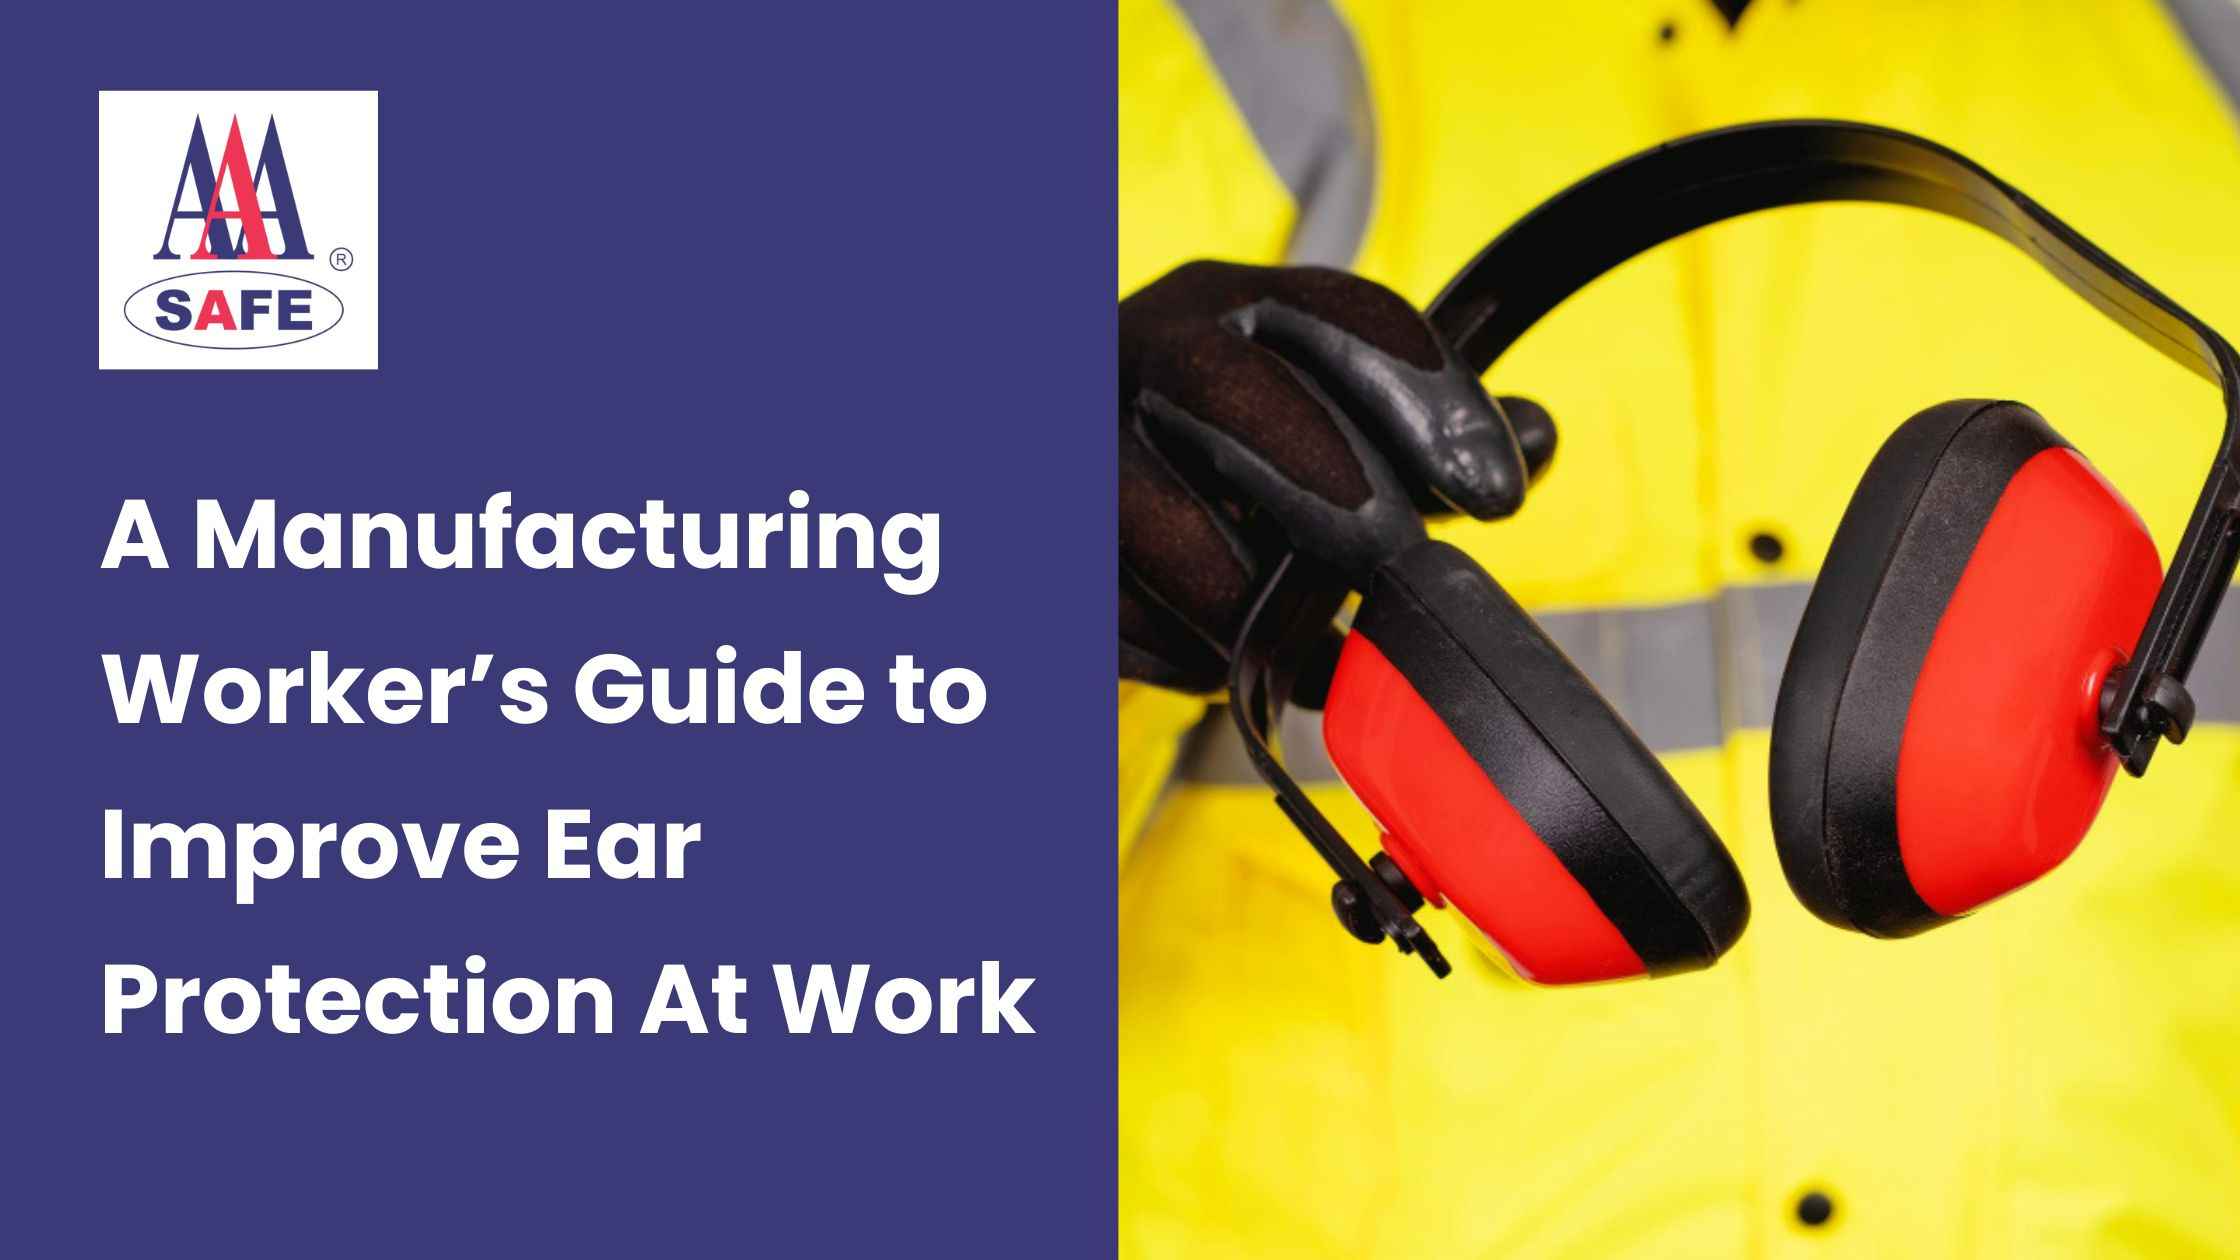 A Manufacturing Worker’s Guide to Improve Ear Protection At Work